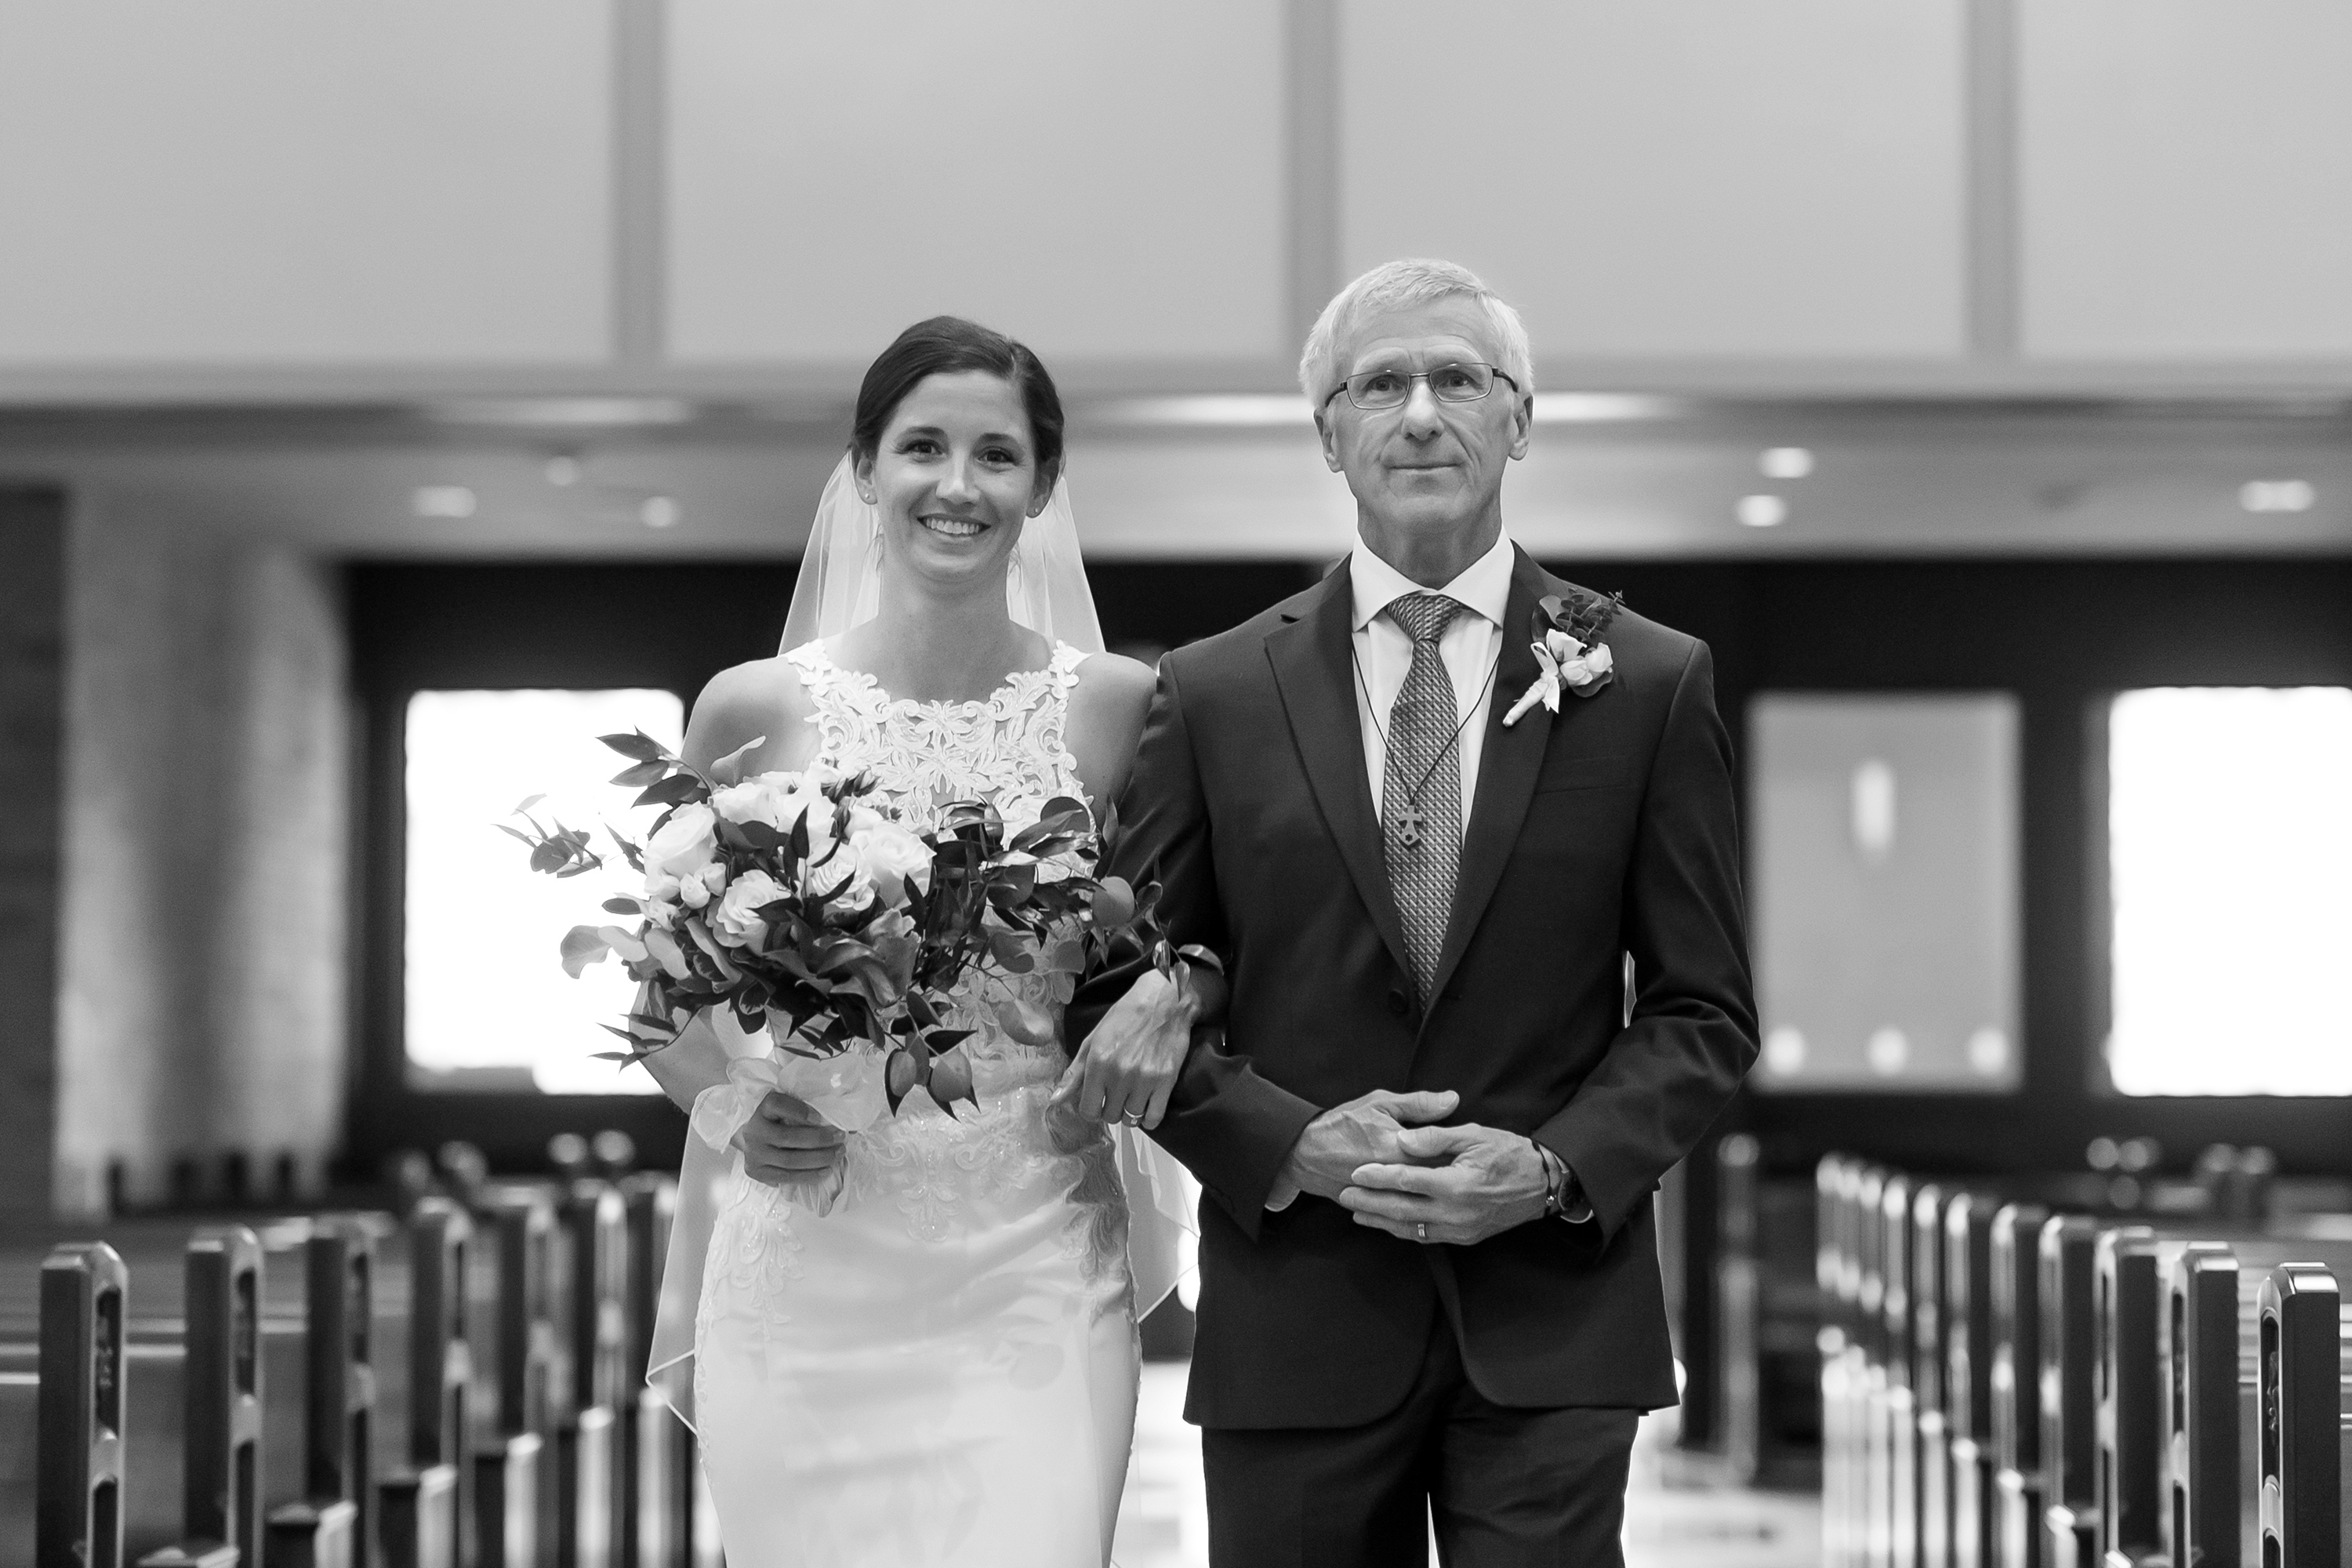 Father walks bride down the aisle at Our Lady of Lourdes Catholic Church in Denver, Colorado